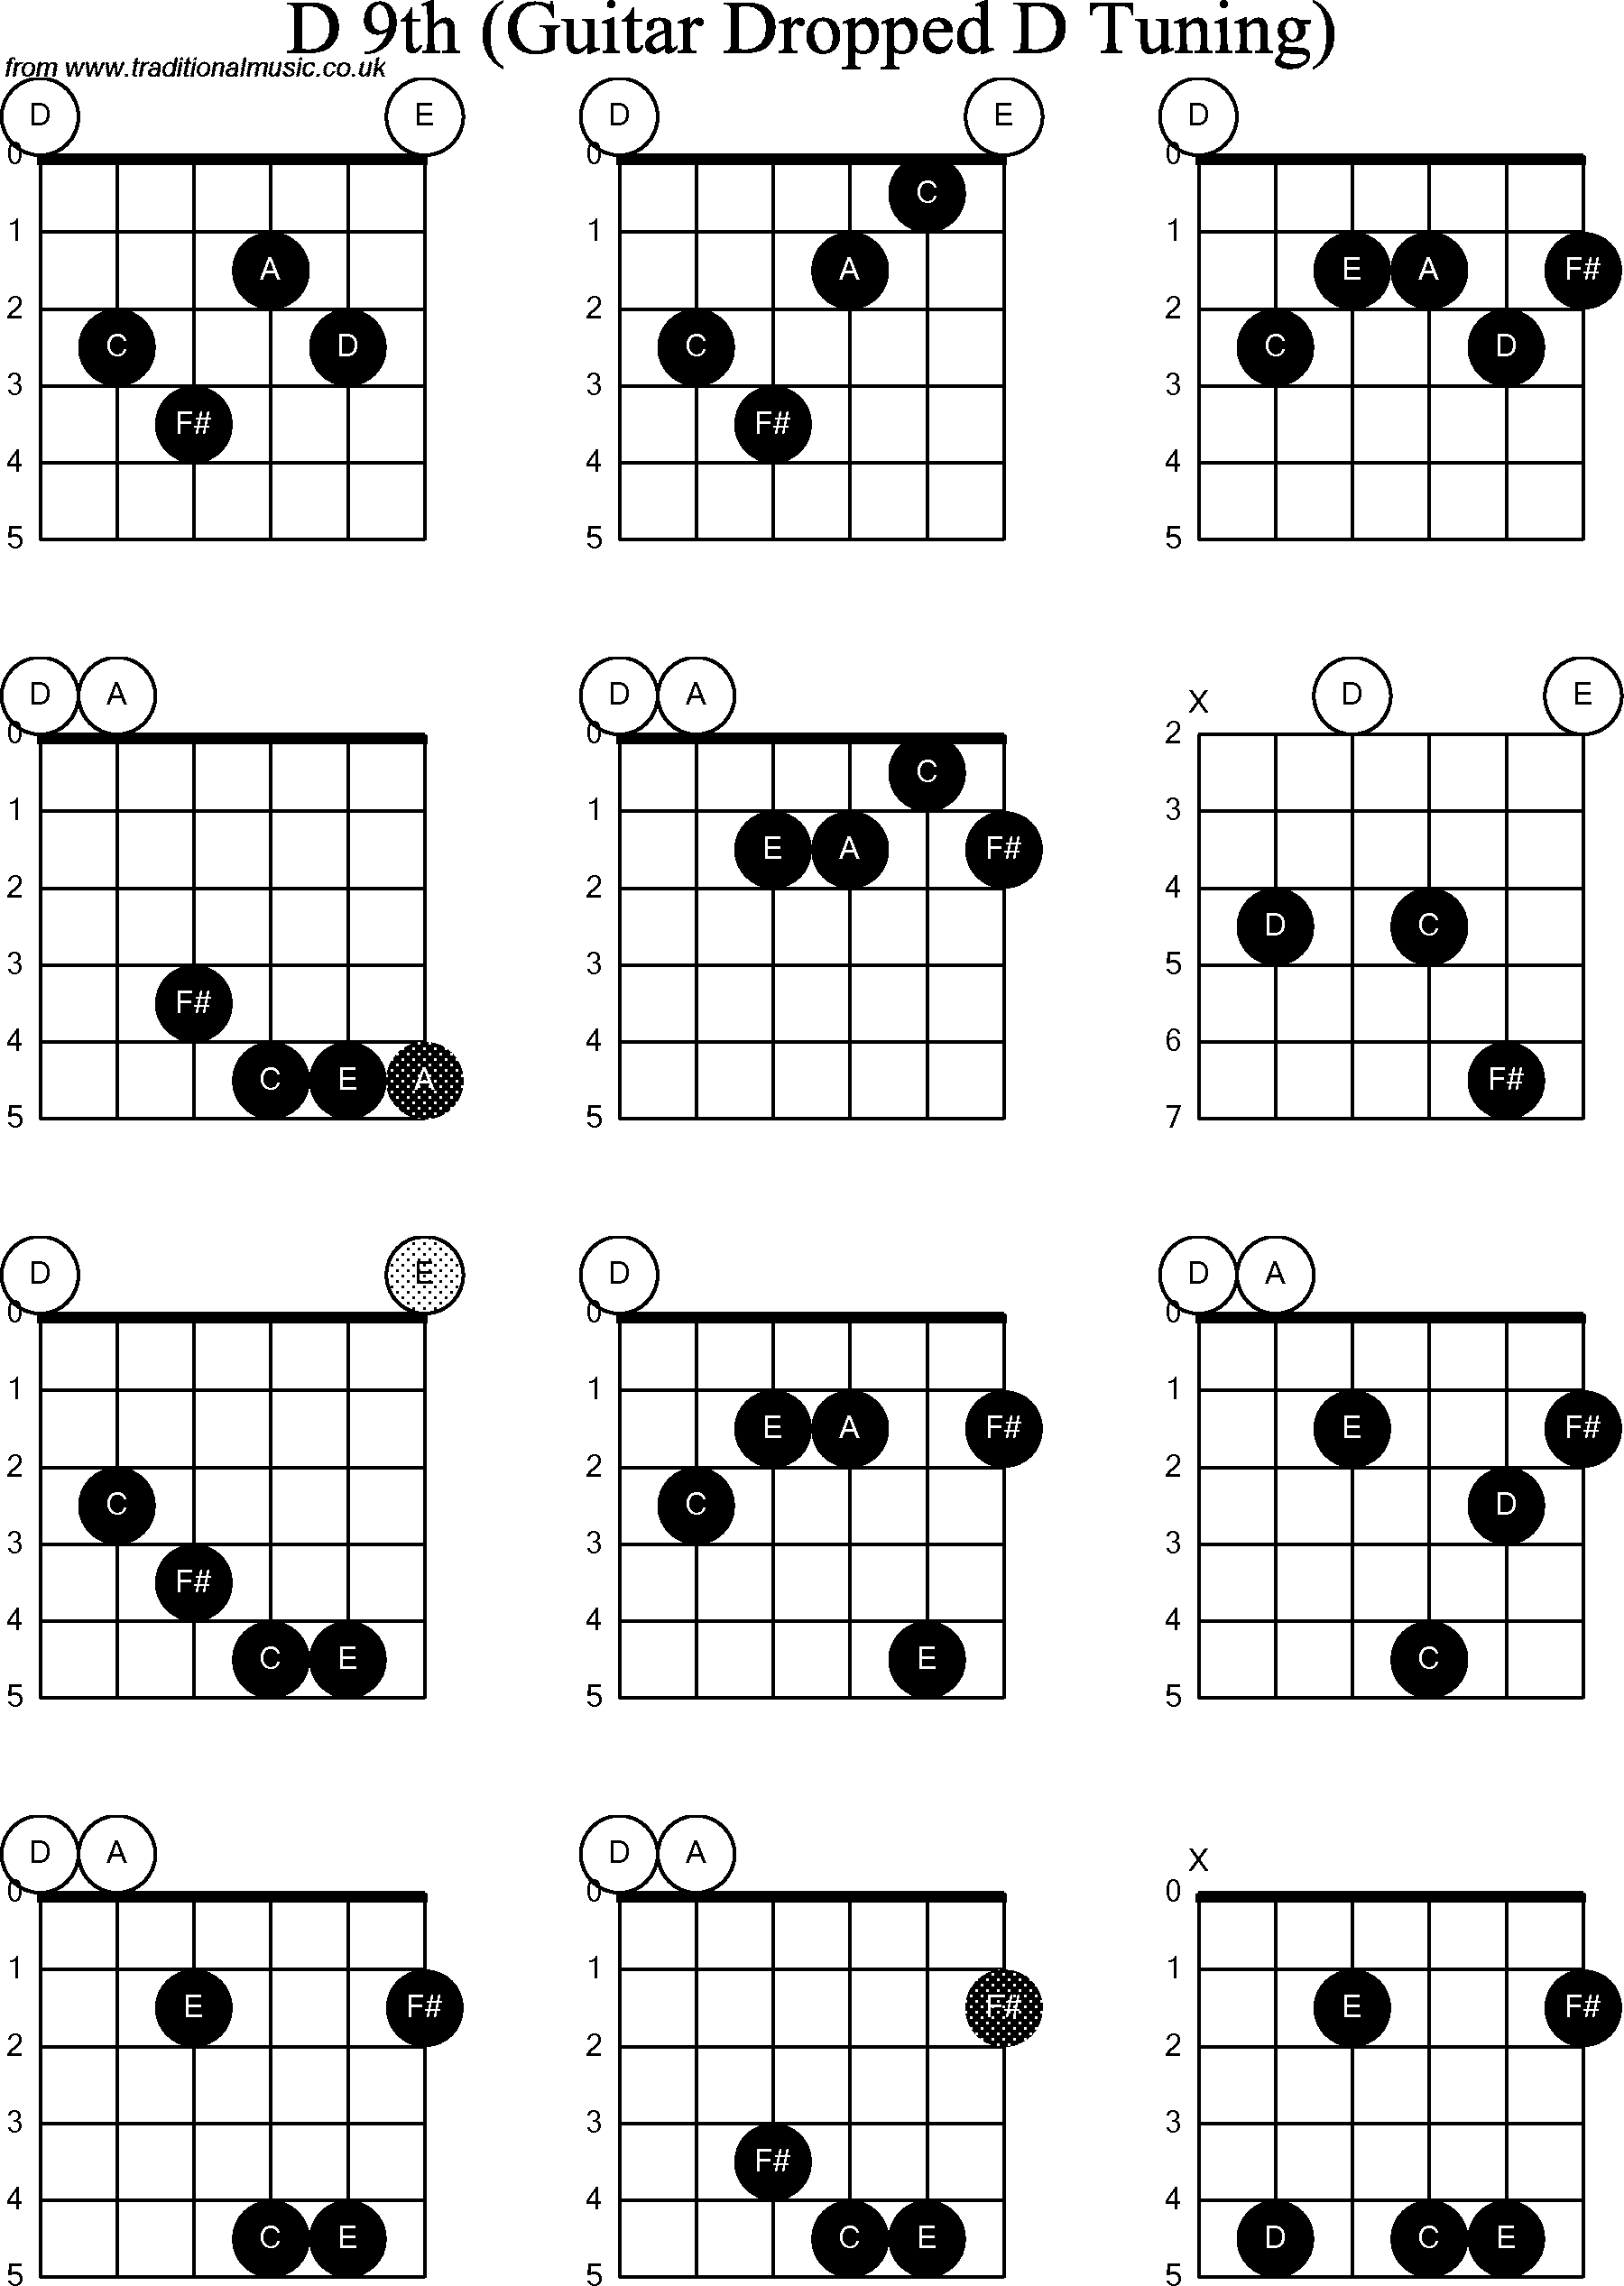 Chord diagrams for dropped D Guitar(DADGBE), D9th